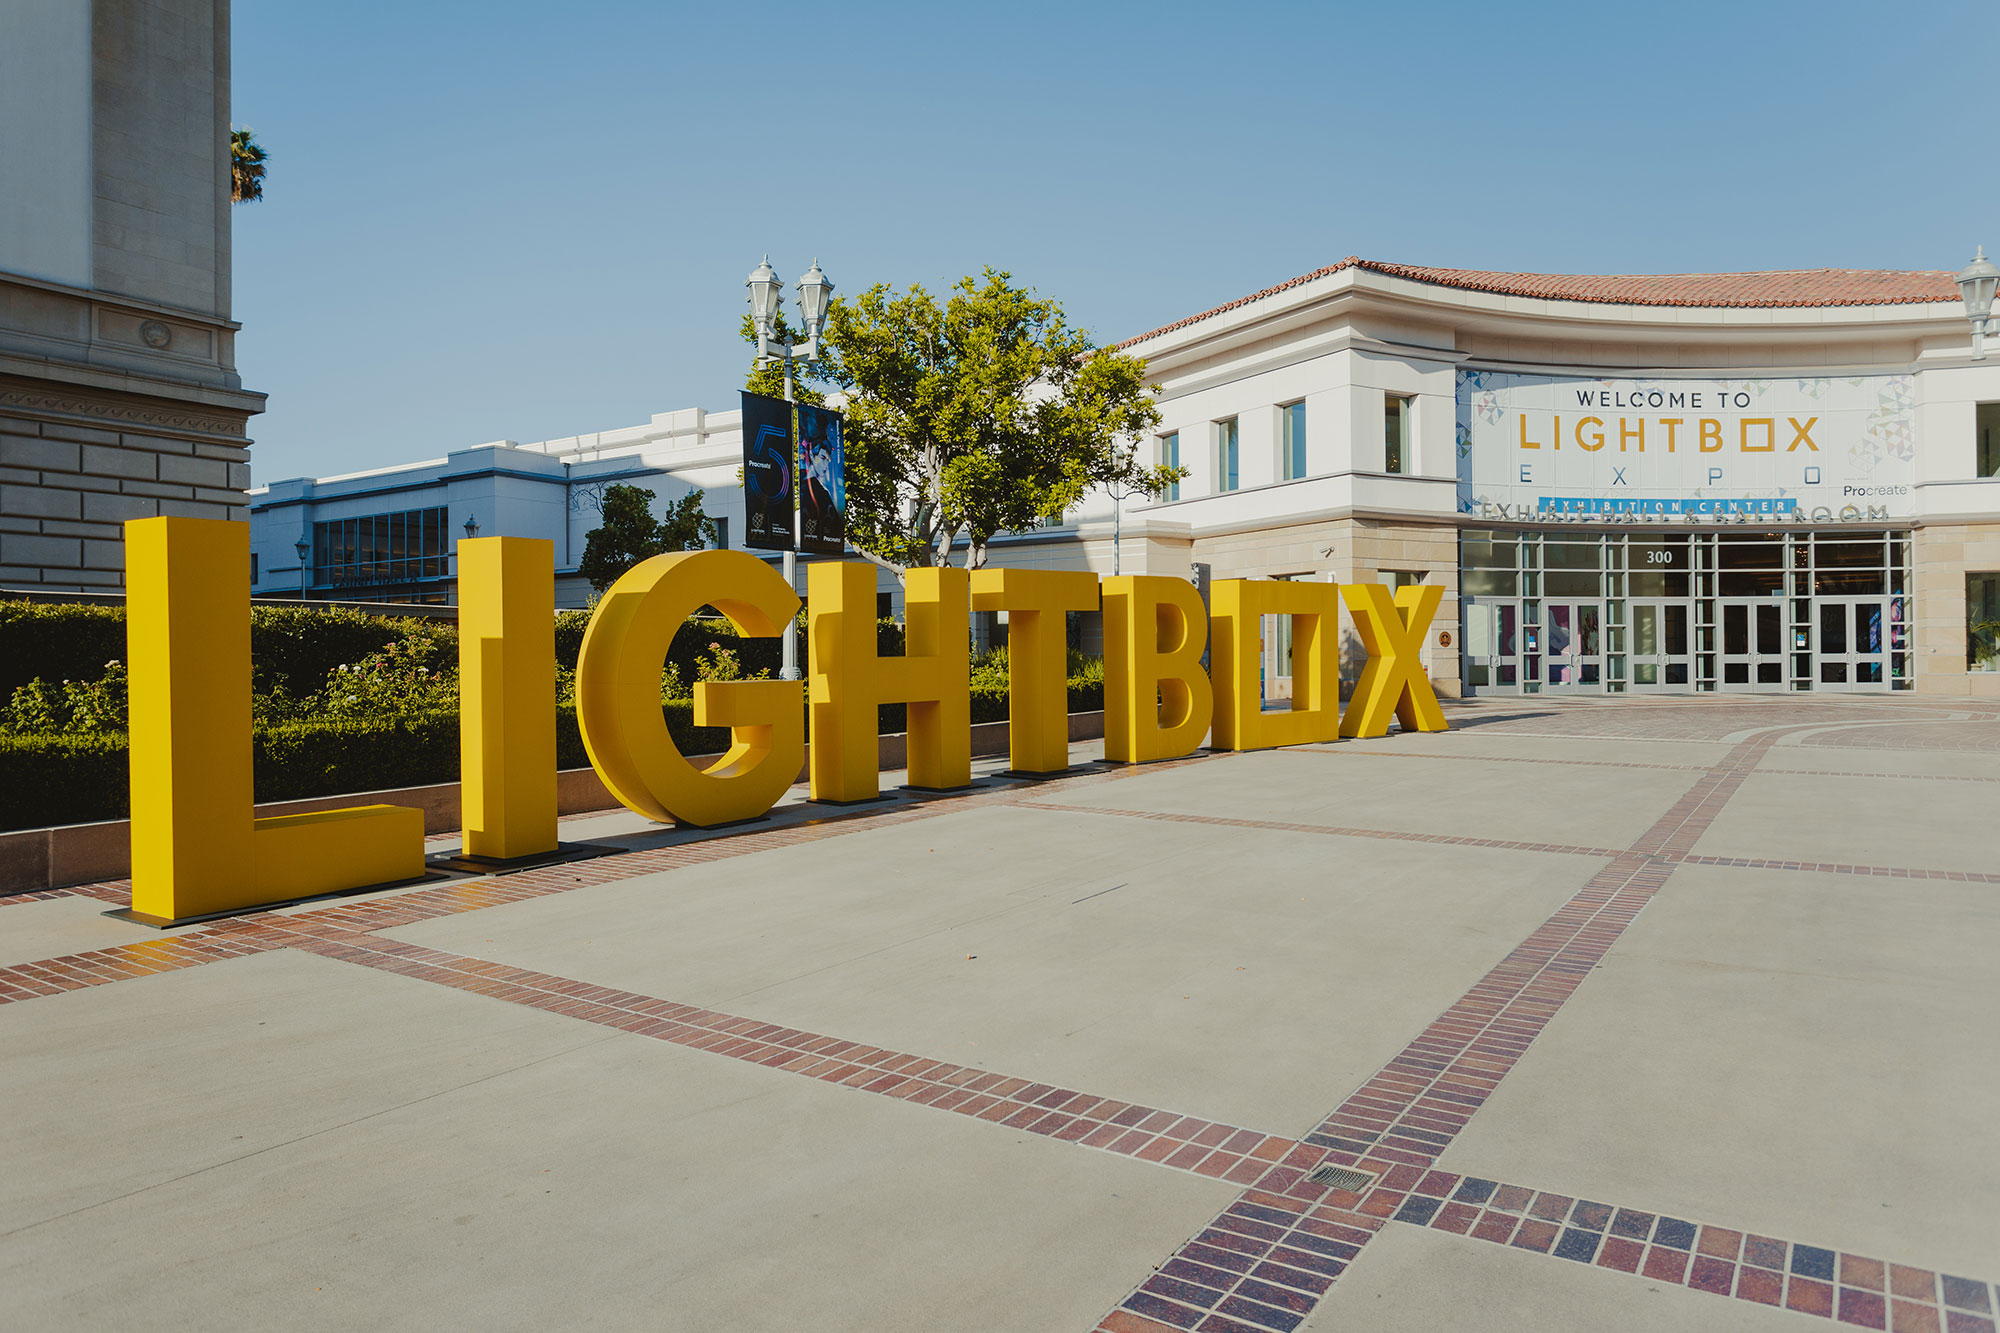 LightBox Expo exclusive programming highlights - 'Moon Girl and Devil Dinosaur' and 'Proud Family'